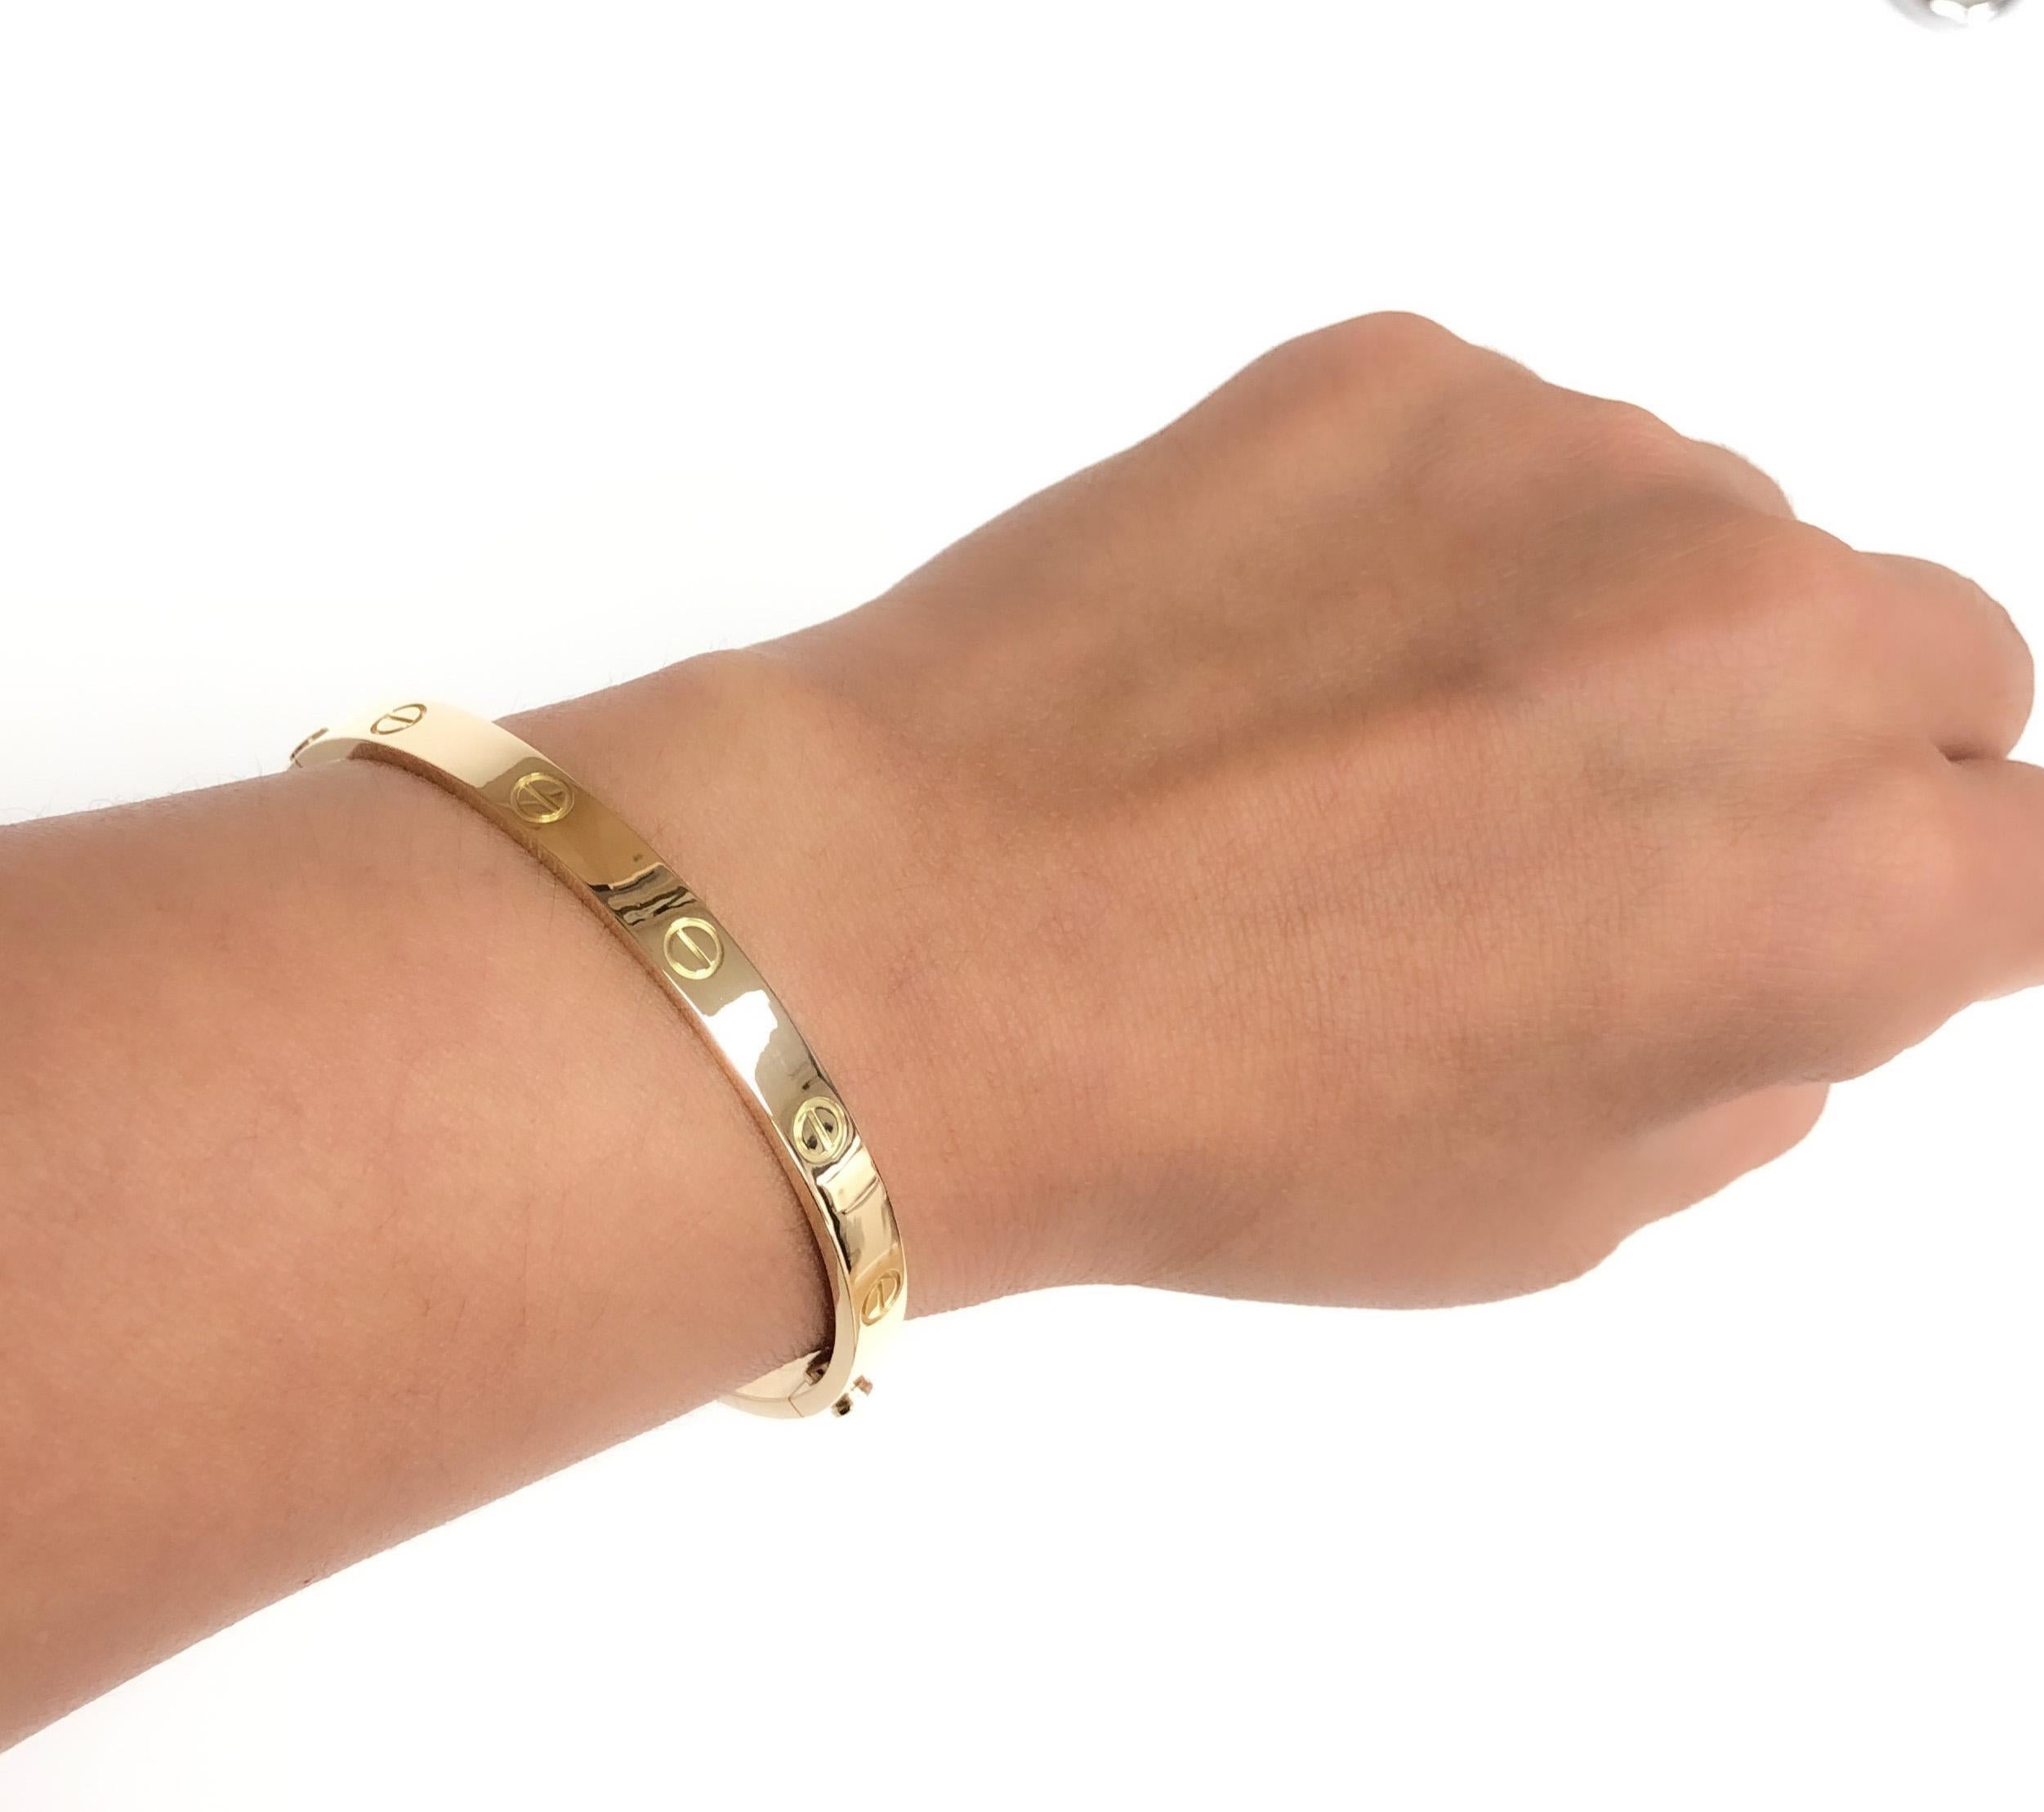 Modern Cartier Love 18K Yellow Gold Bangle Bracelet Size 16 with Certificate